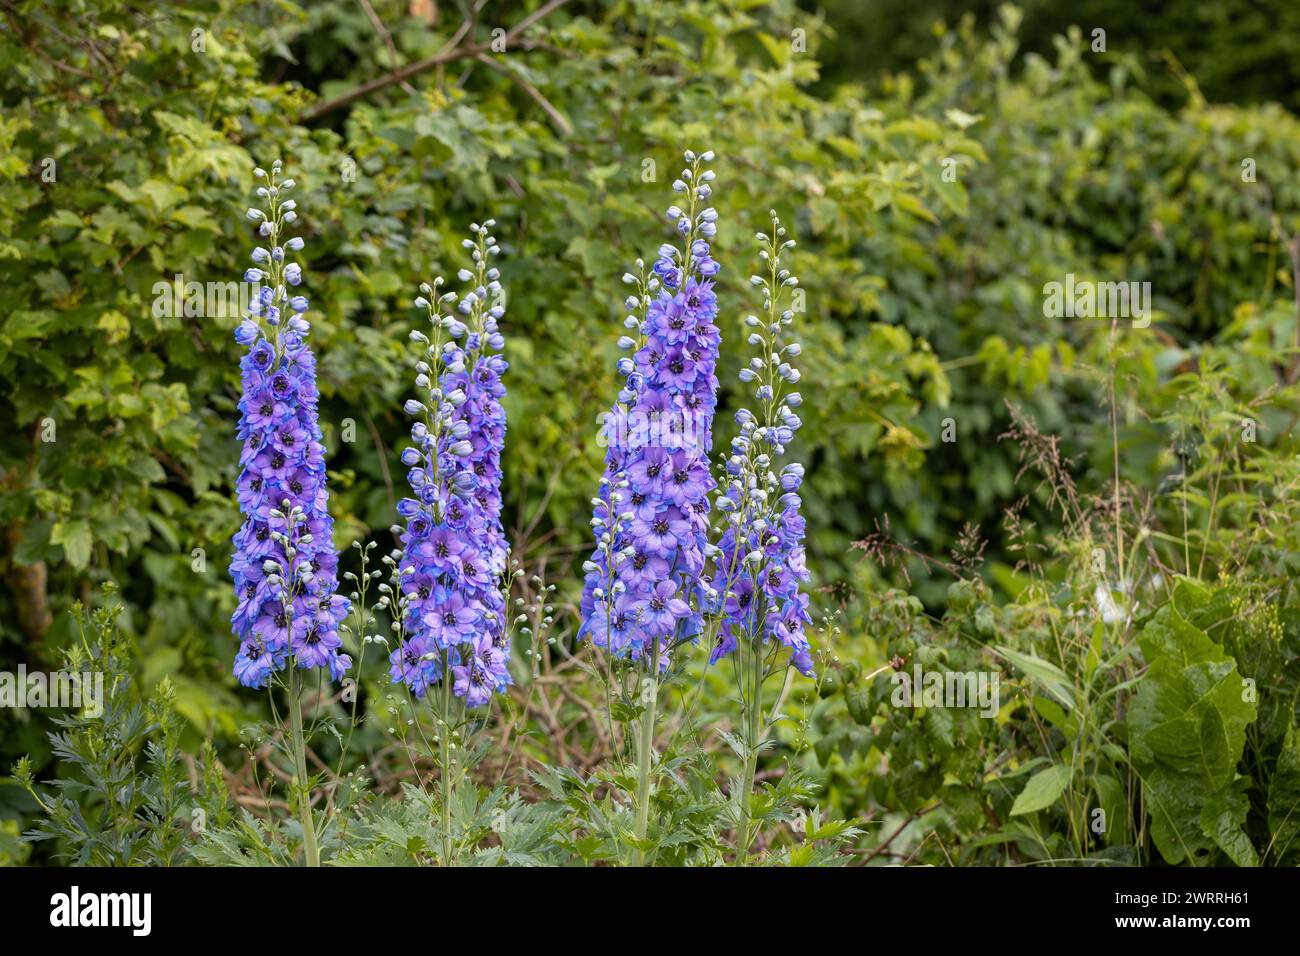 Blue delphinium flower as nice natural background Stock Photo